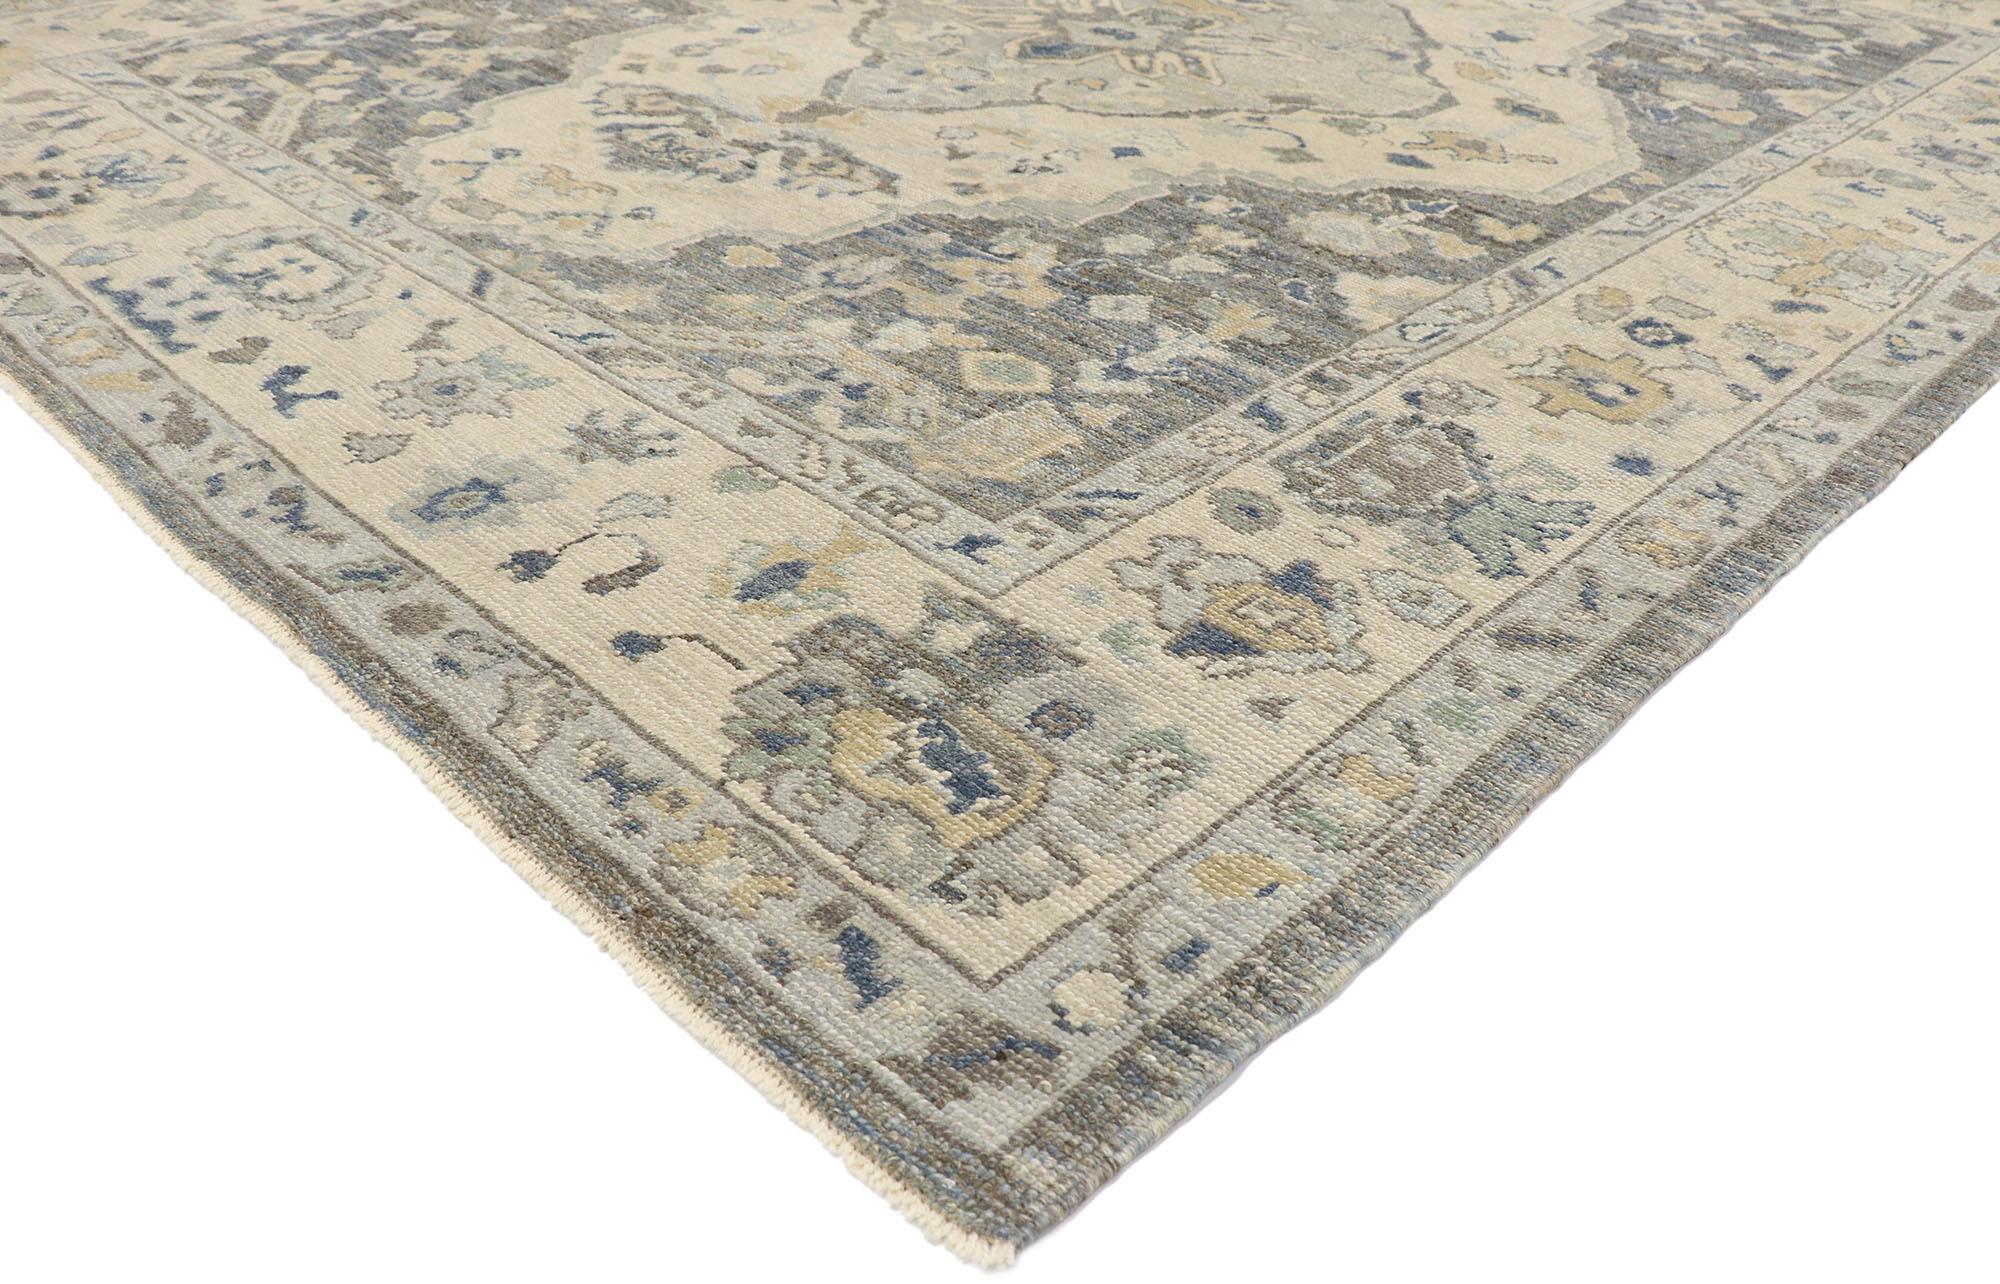 53556, new contemporary Turkish Oushak rug with Modern Coastal style. This hand-knotted wool contemporary Turkish Oushak rug features an all-over floral pattern spread across an abrashed field. An array of botanical motifs decorates the field in an